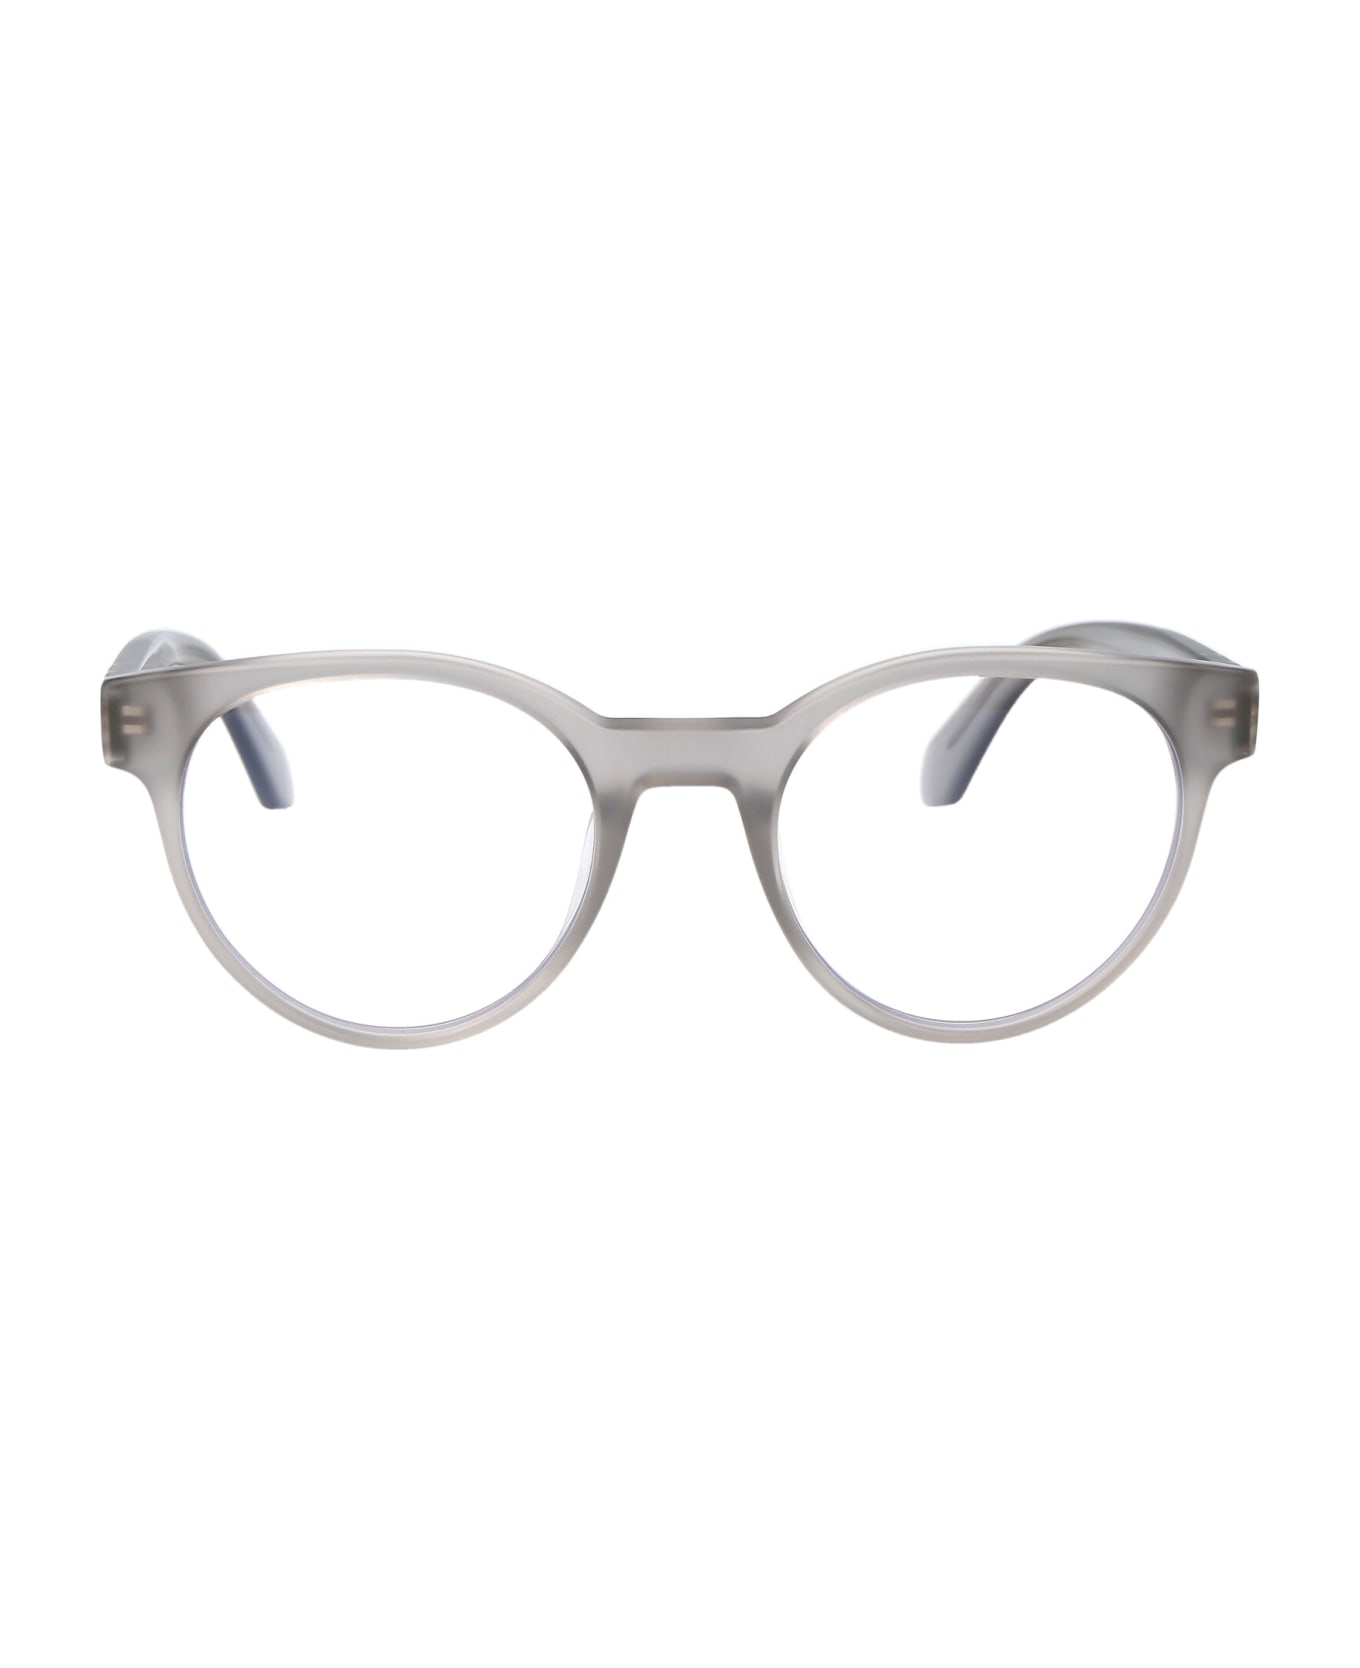 Off-White Optical Style 68 Glasses - 0900 GREY 